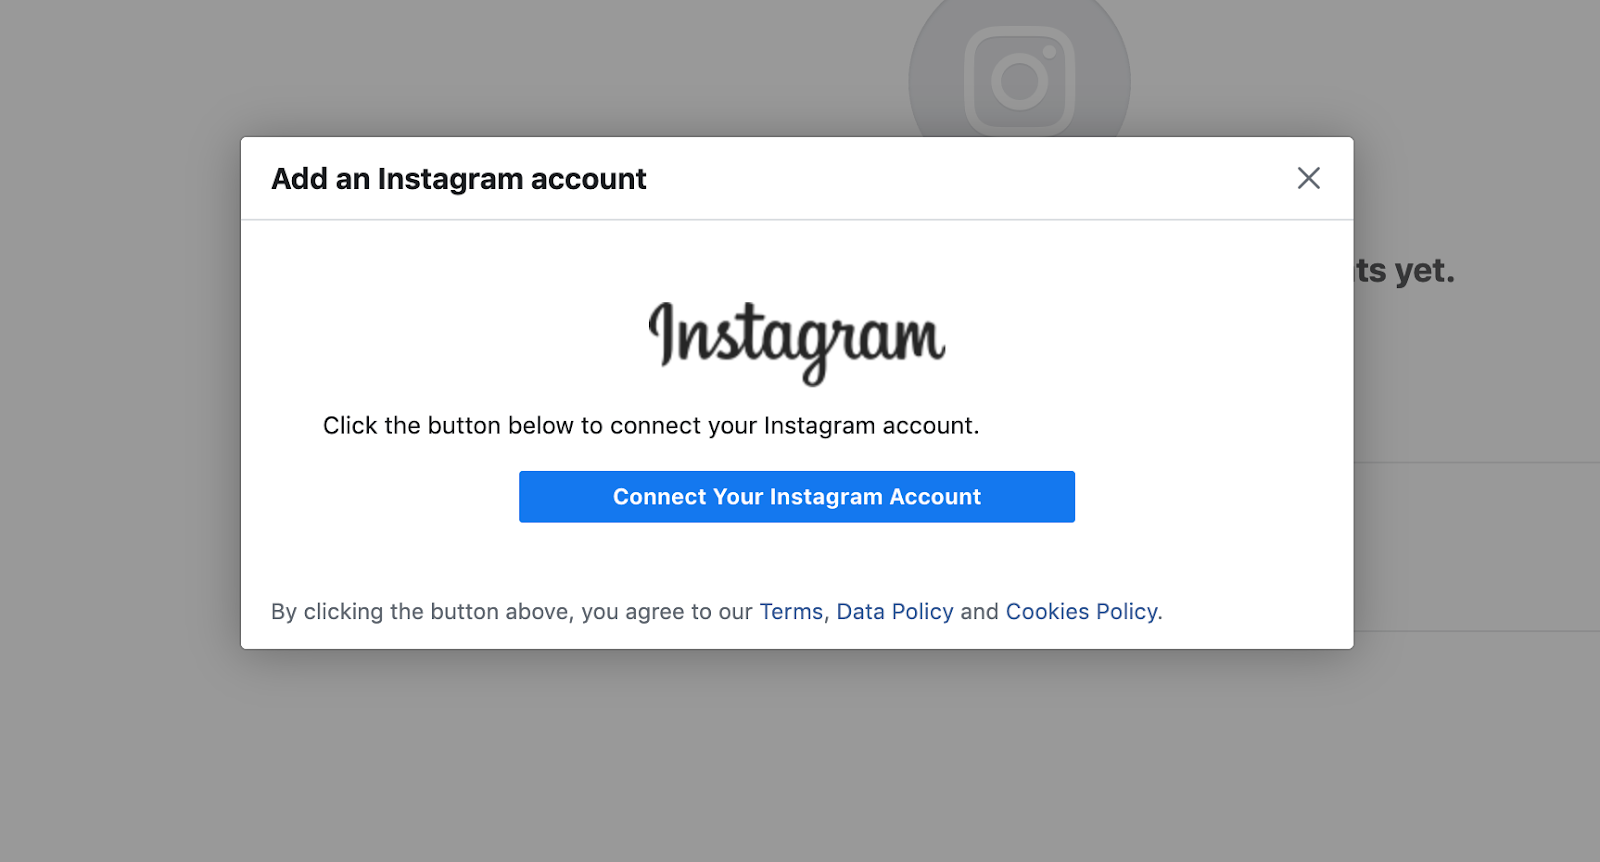 How to connect an influencer's Instagram and Facebook account to Facebook Business Manager